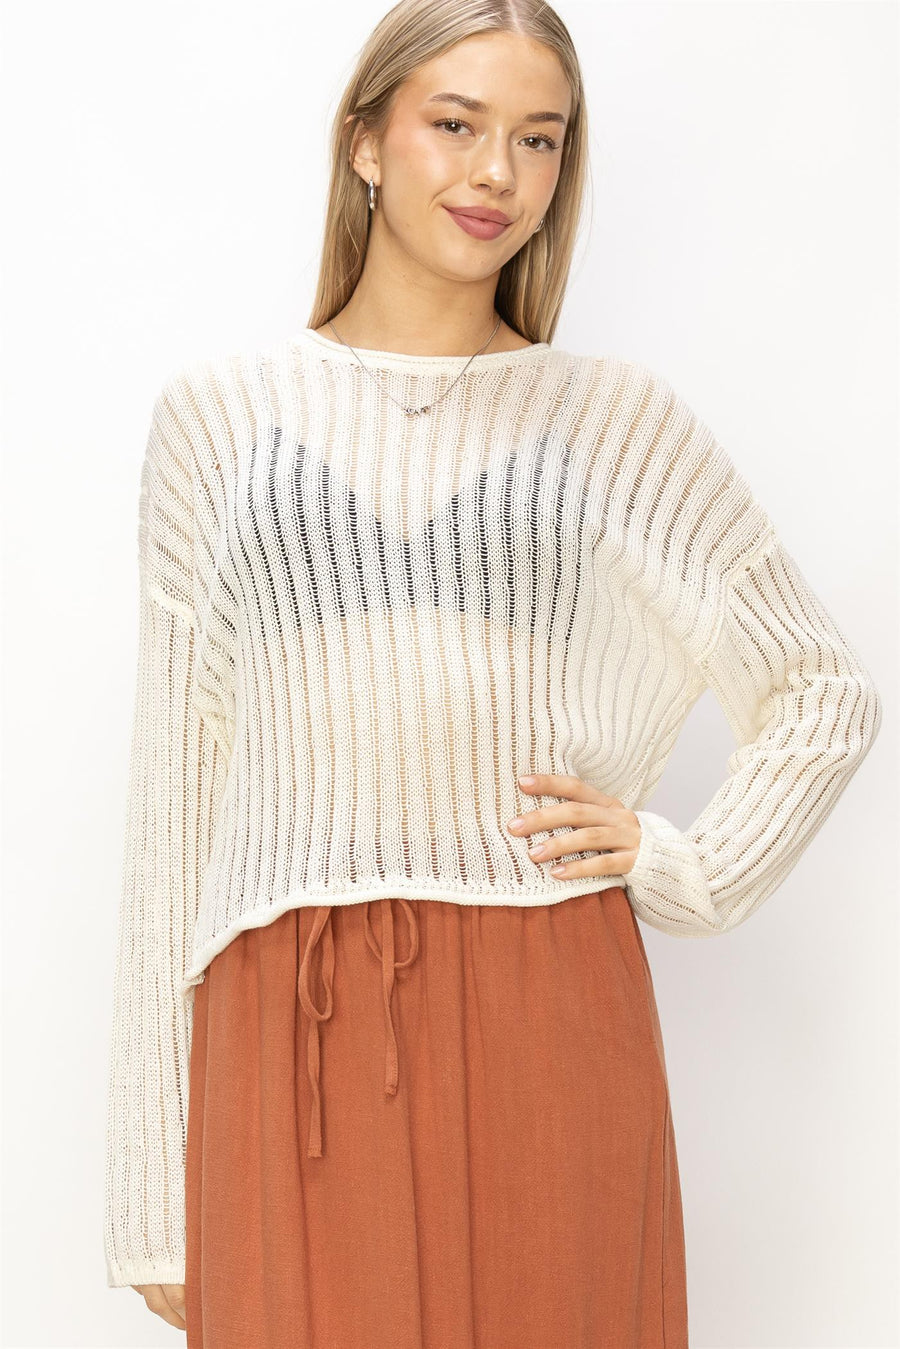 Whip cream colored long sleeve knitted top with drop sleeves and a round neck. 